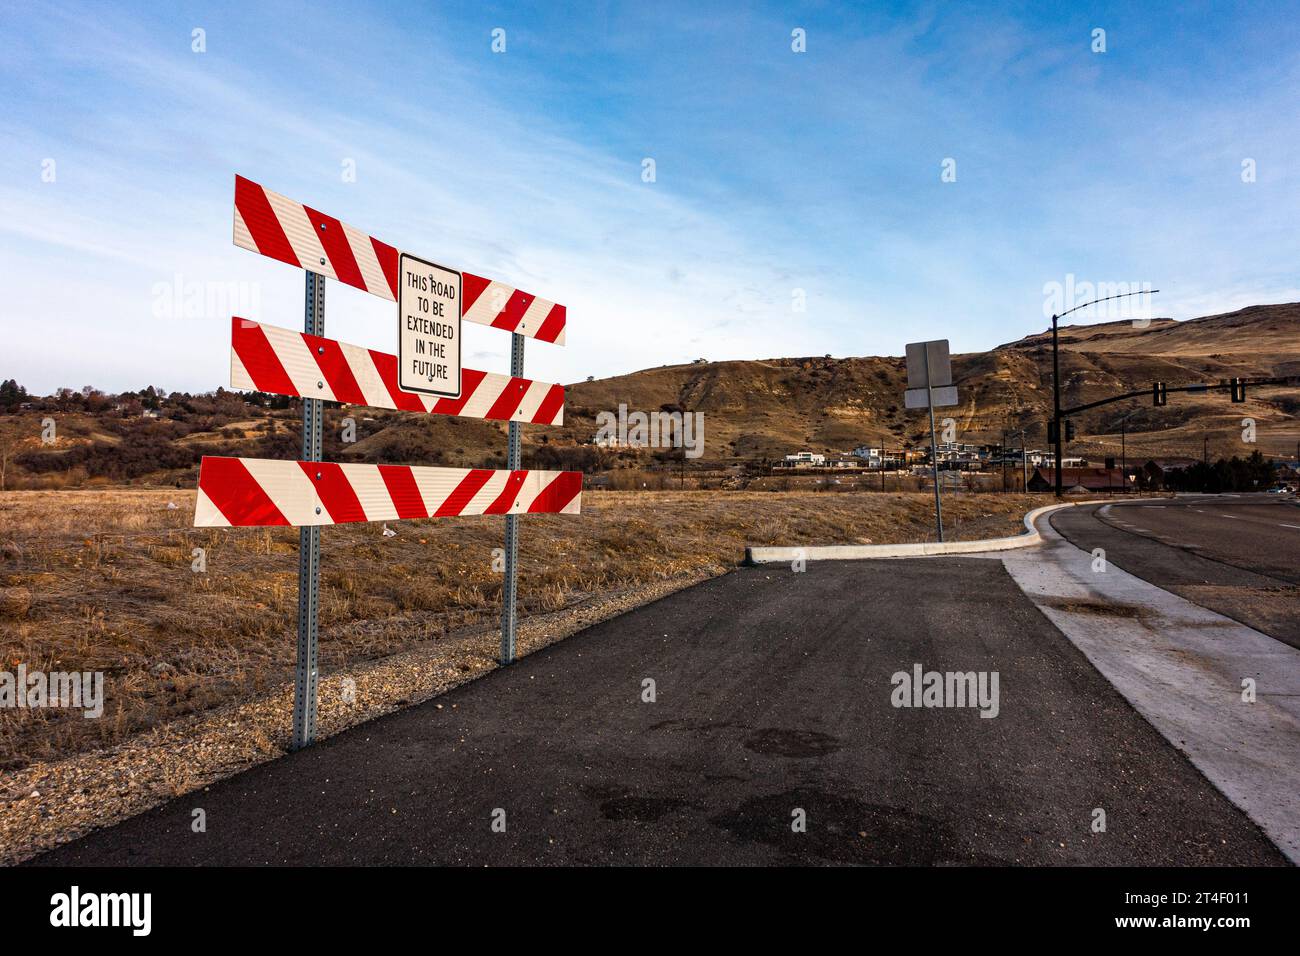 Residential and commercial construction proceeds at a rapid pace, often displacing wildlife , at the Harris Ranch development in Boise, Idaho. Stock Photo